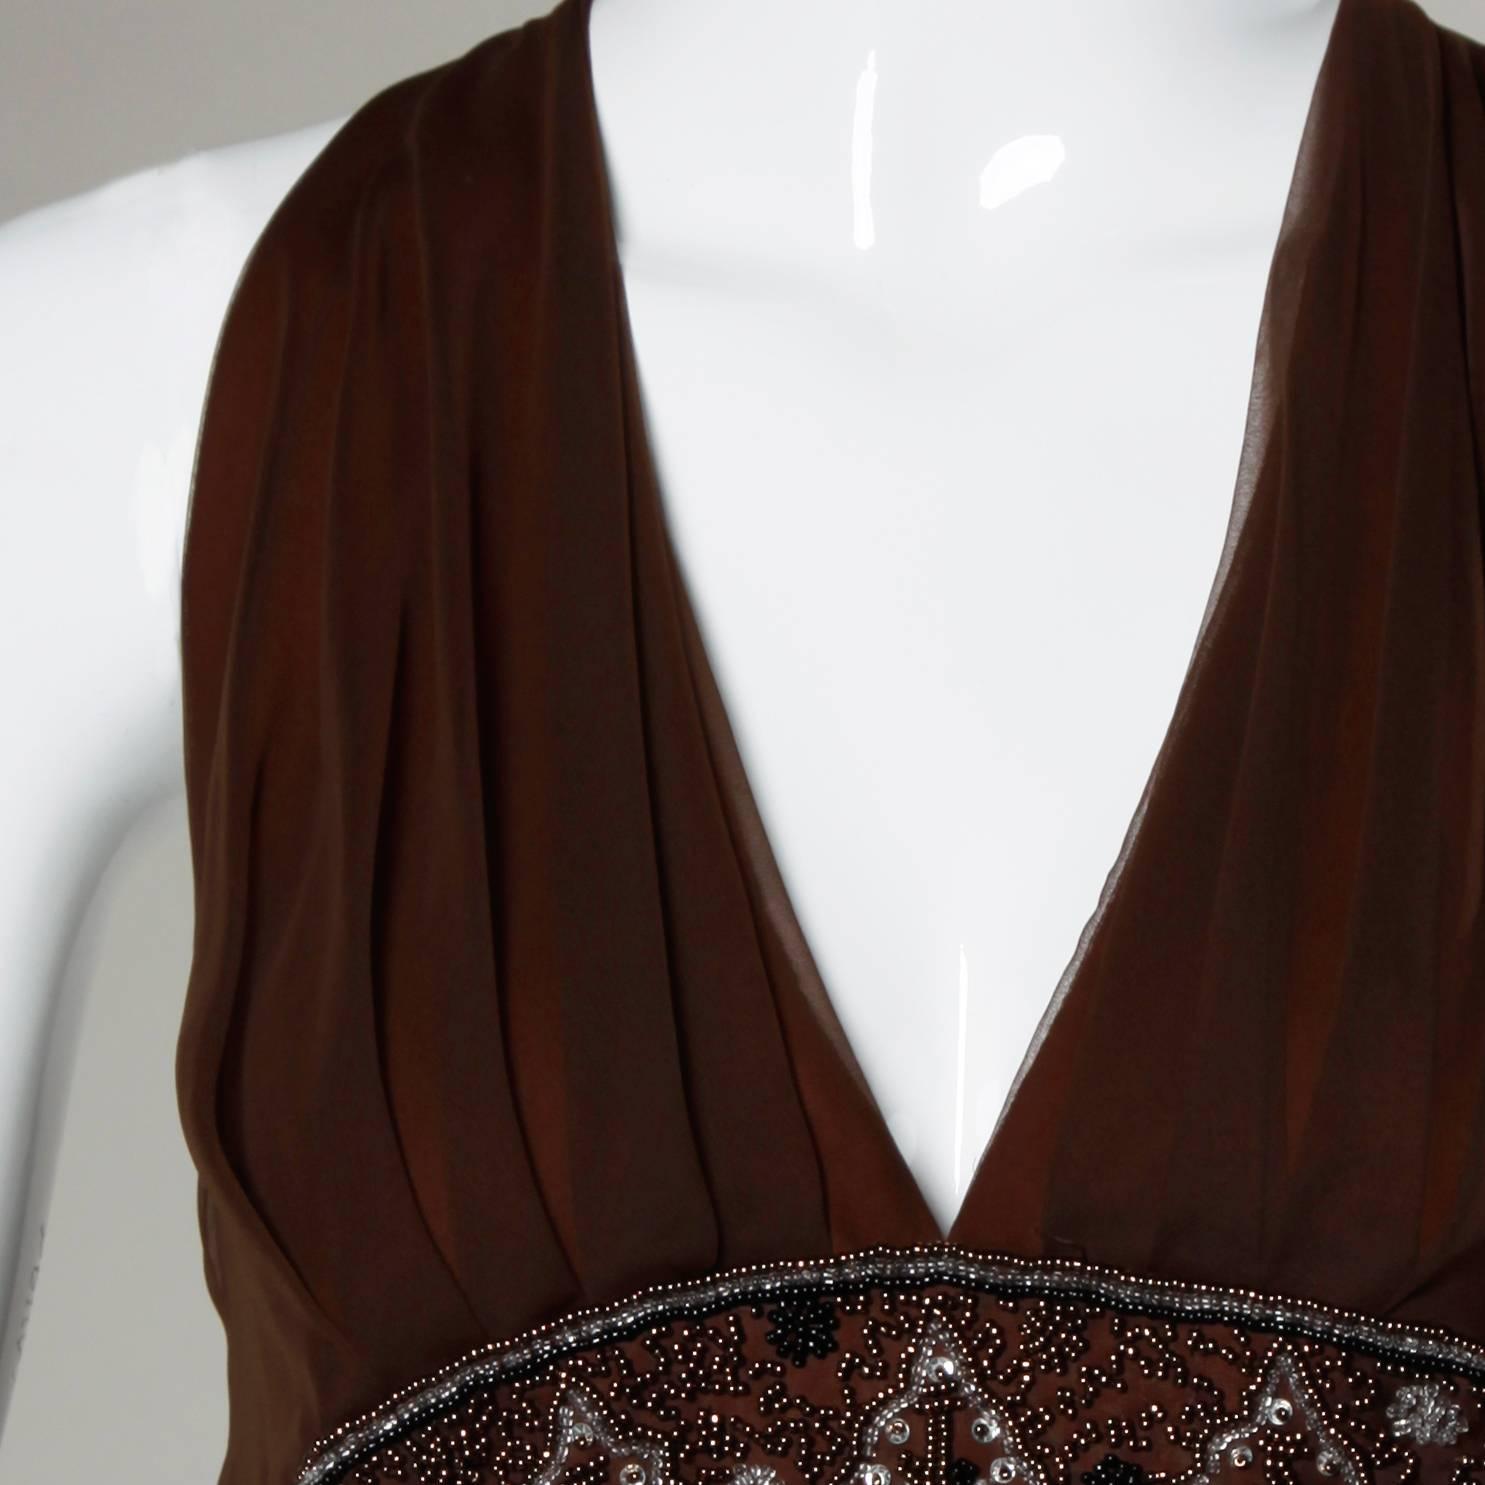 Brown chiffon maxi dress with a beaded empire waist and plunging neckline by Jack Bryan. Full sweep.

Details:

Fully Lined
Back Zip and Hook Closure
Marked Size: US 14
Estimated Size: M-L
Color: Transparent Brown/ Burnt Orange 
Fabric: Not